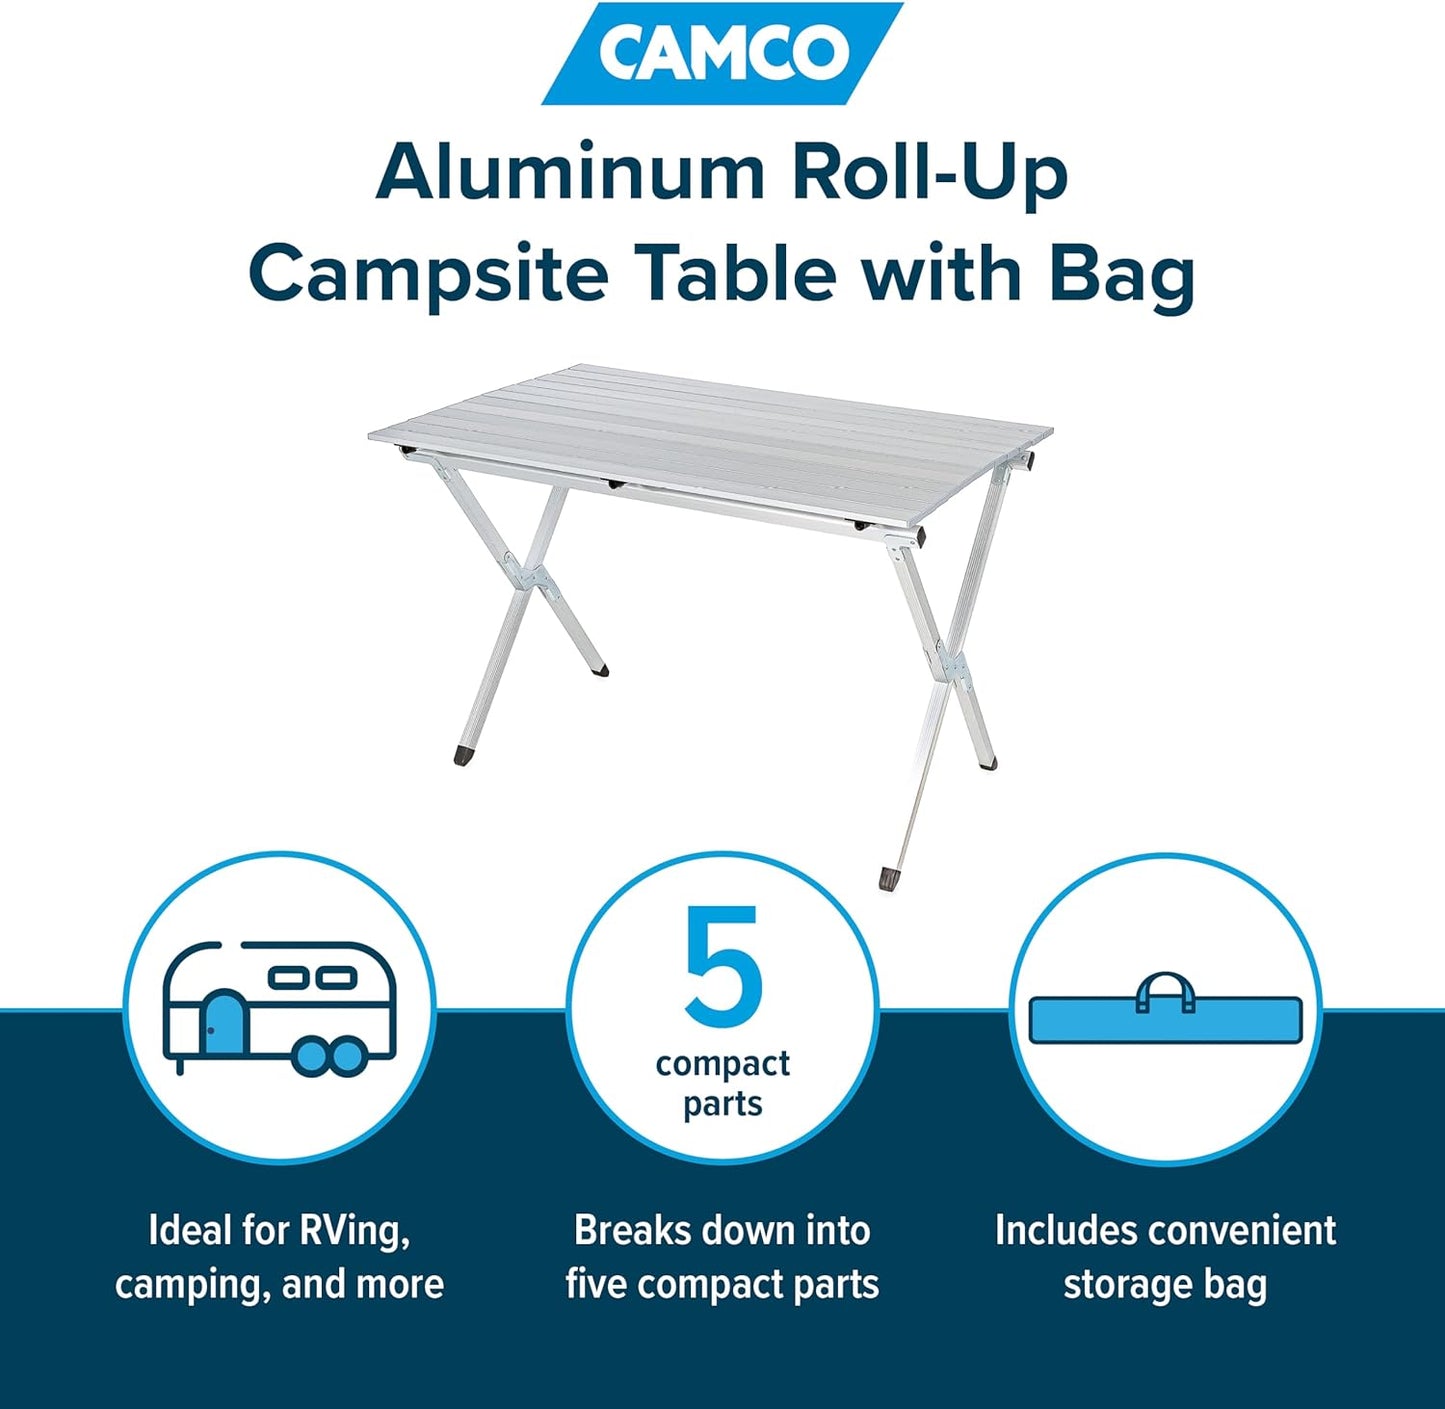 Camco Aluminum Roll-Up Campsite Table with Carrying Bag - Ideal for Tailgating, Camping, The Beach, Parties and More - Lightweight Design and Rust Resistant (51896)